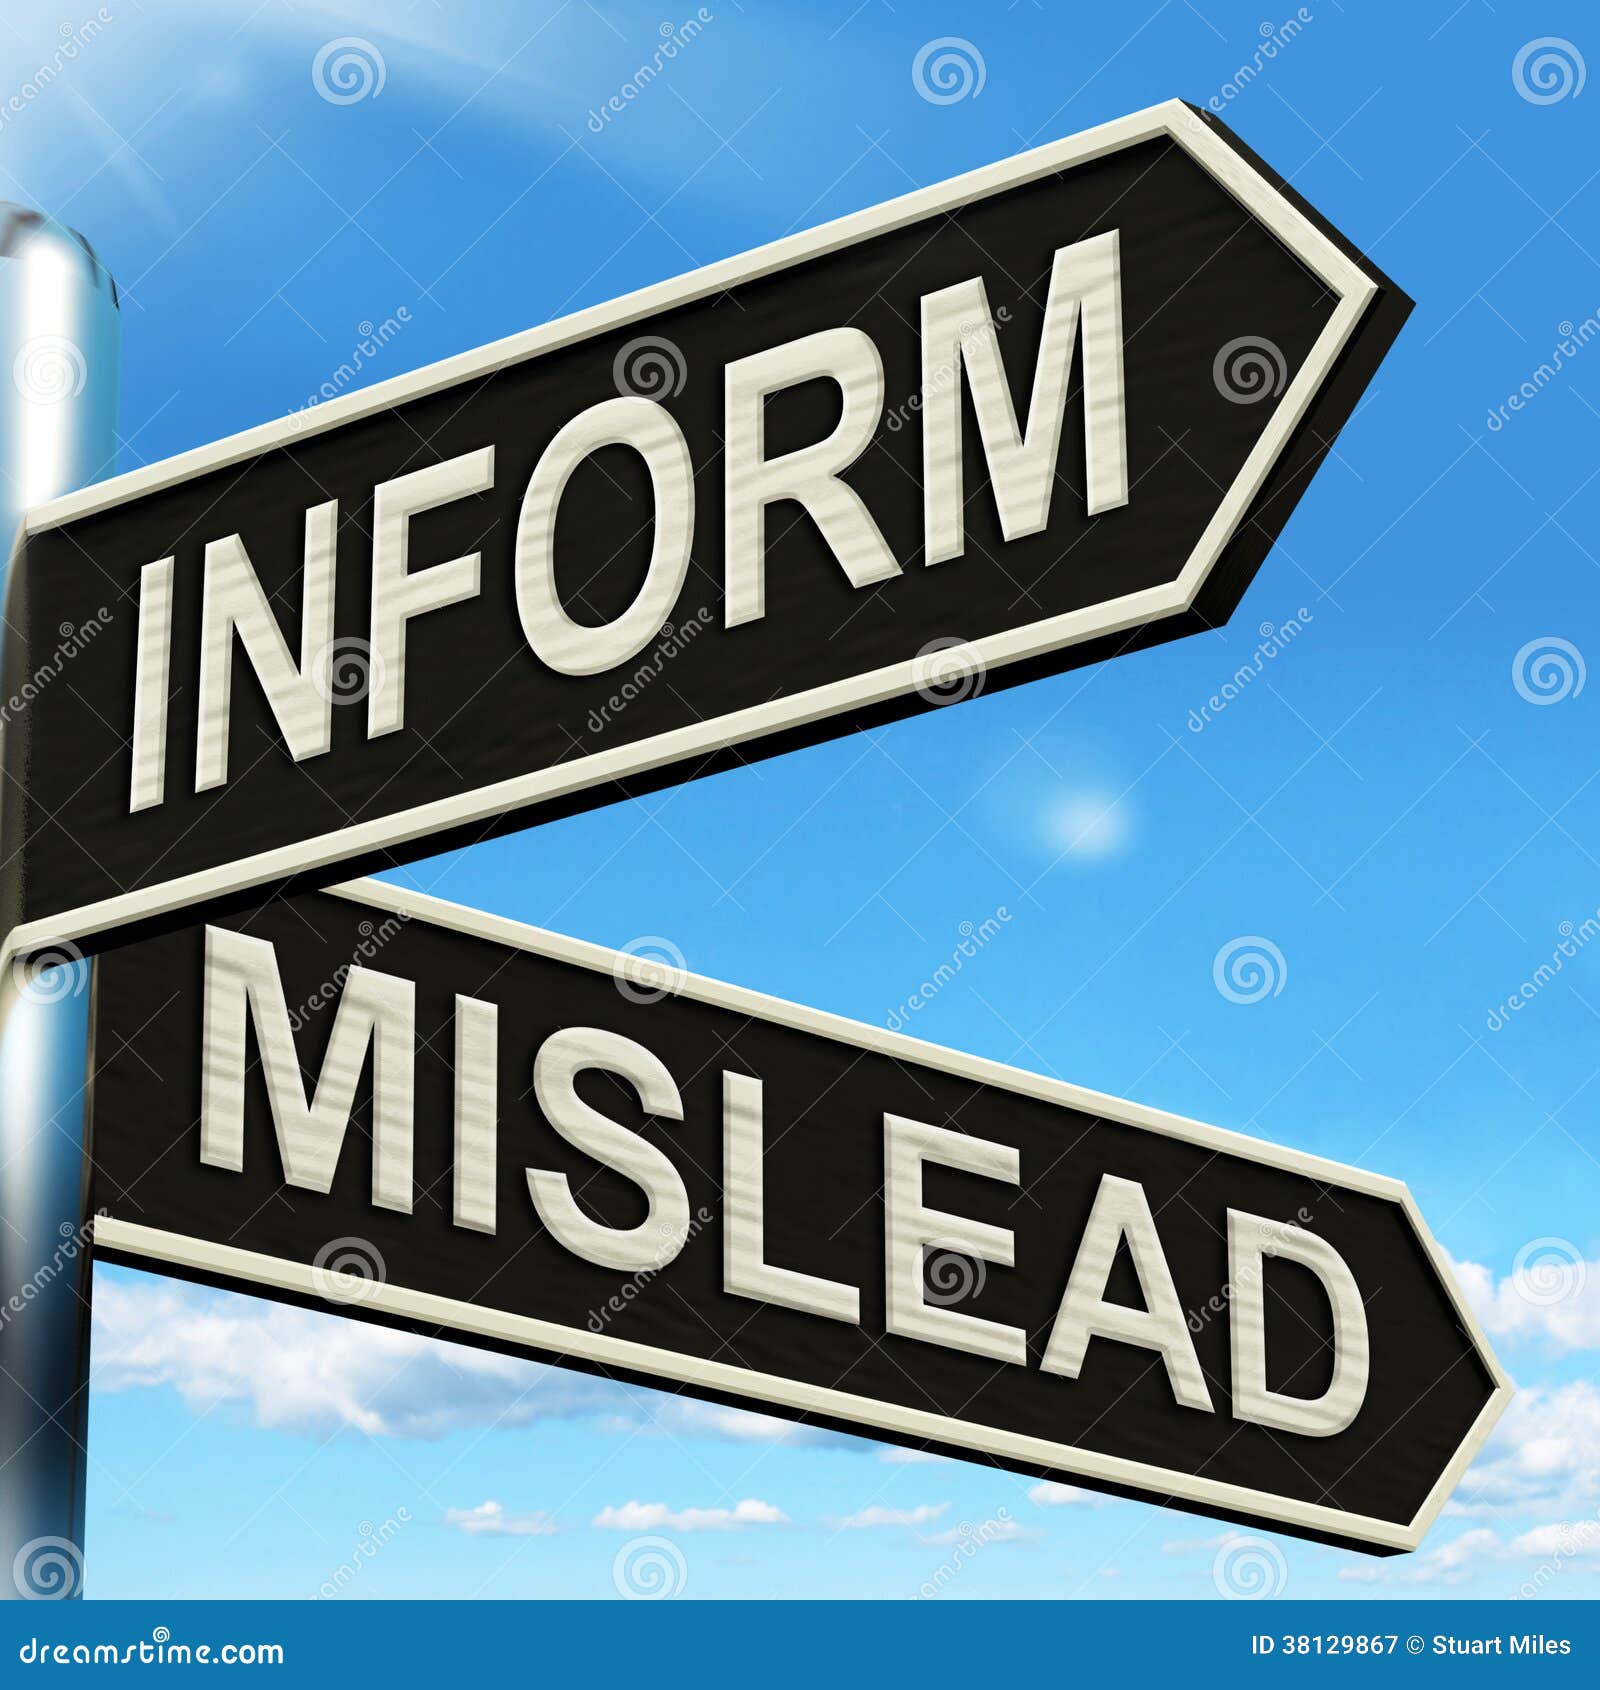 inform mislead signpost means let know or misguide